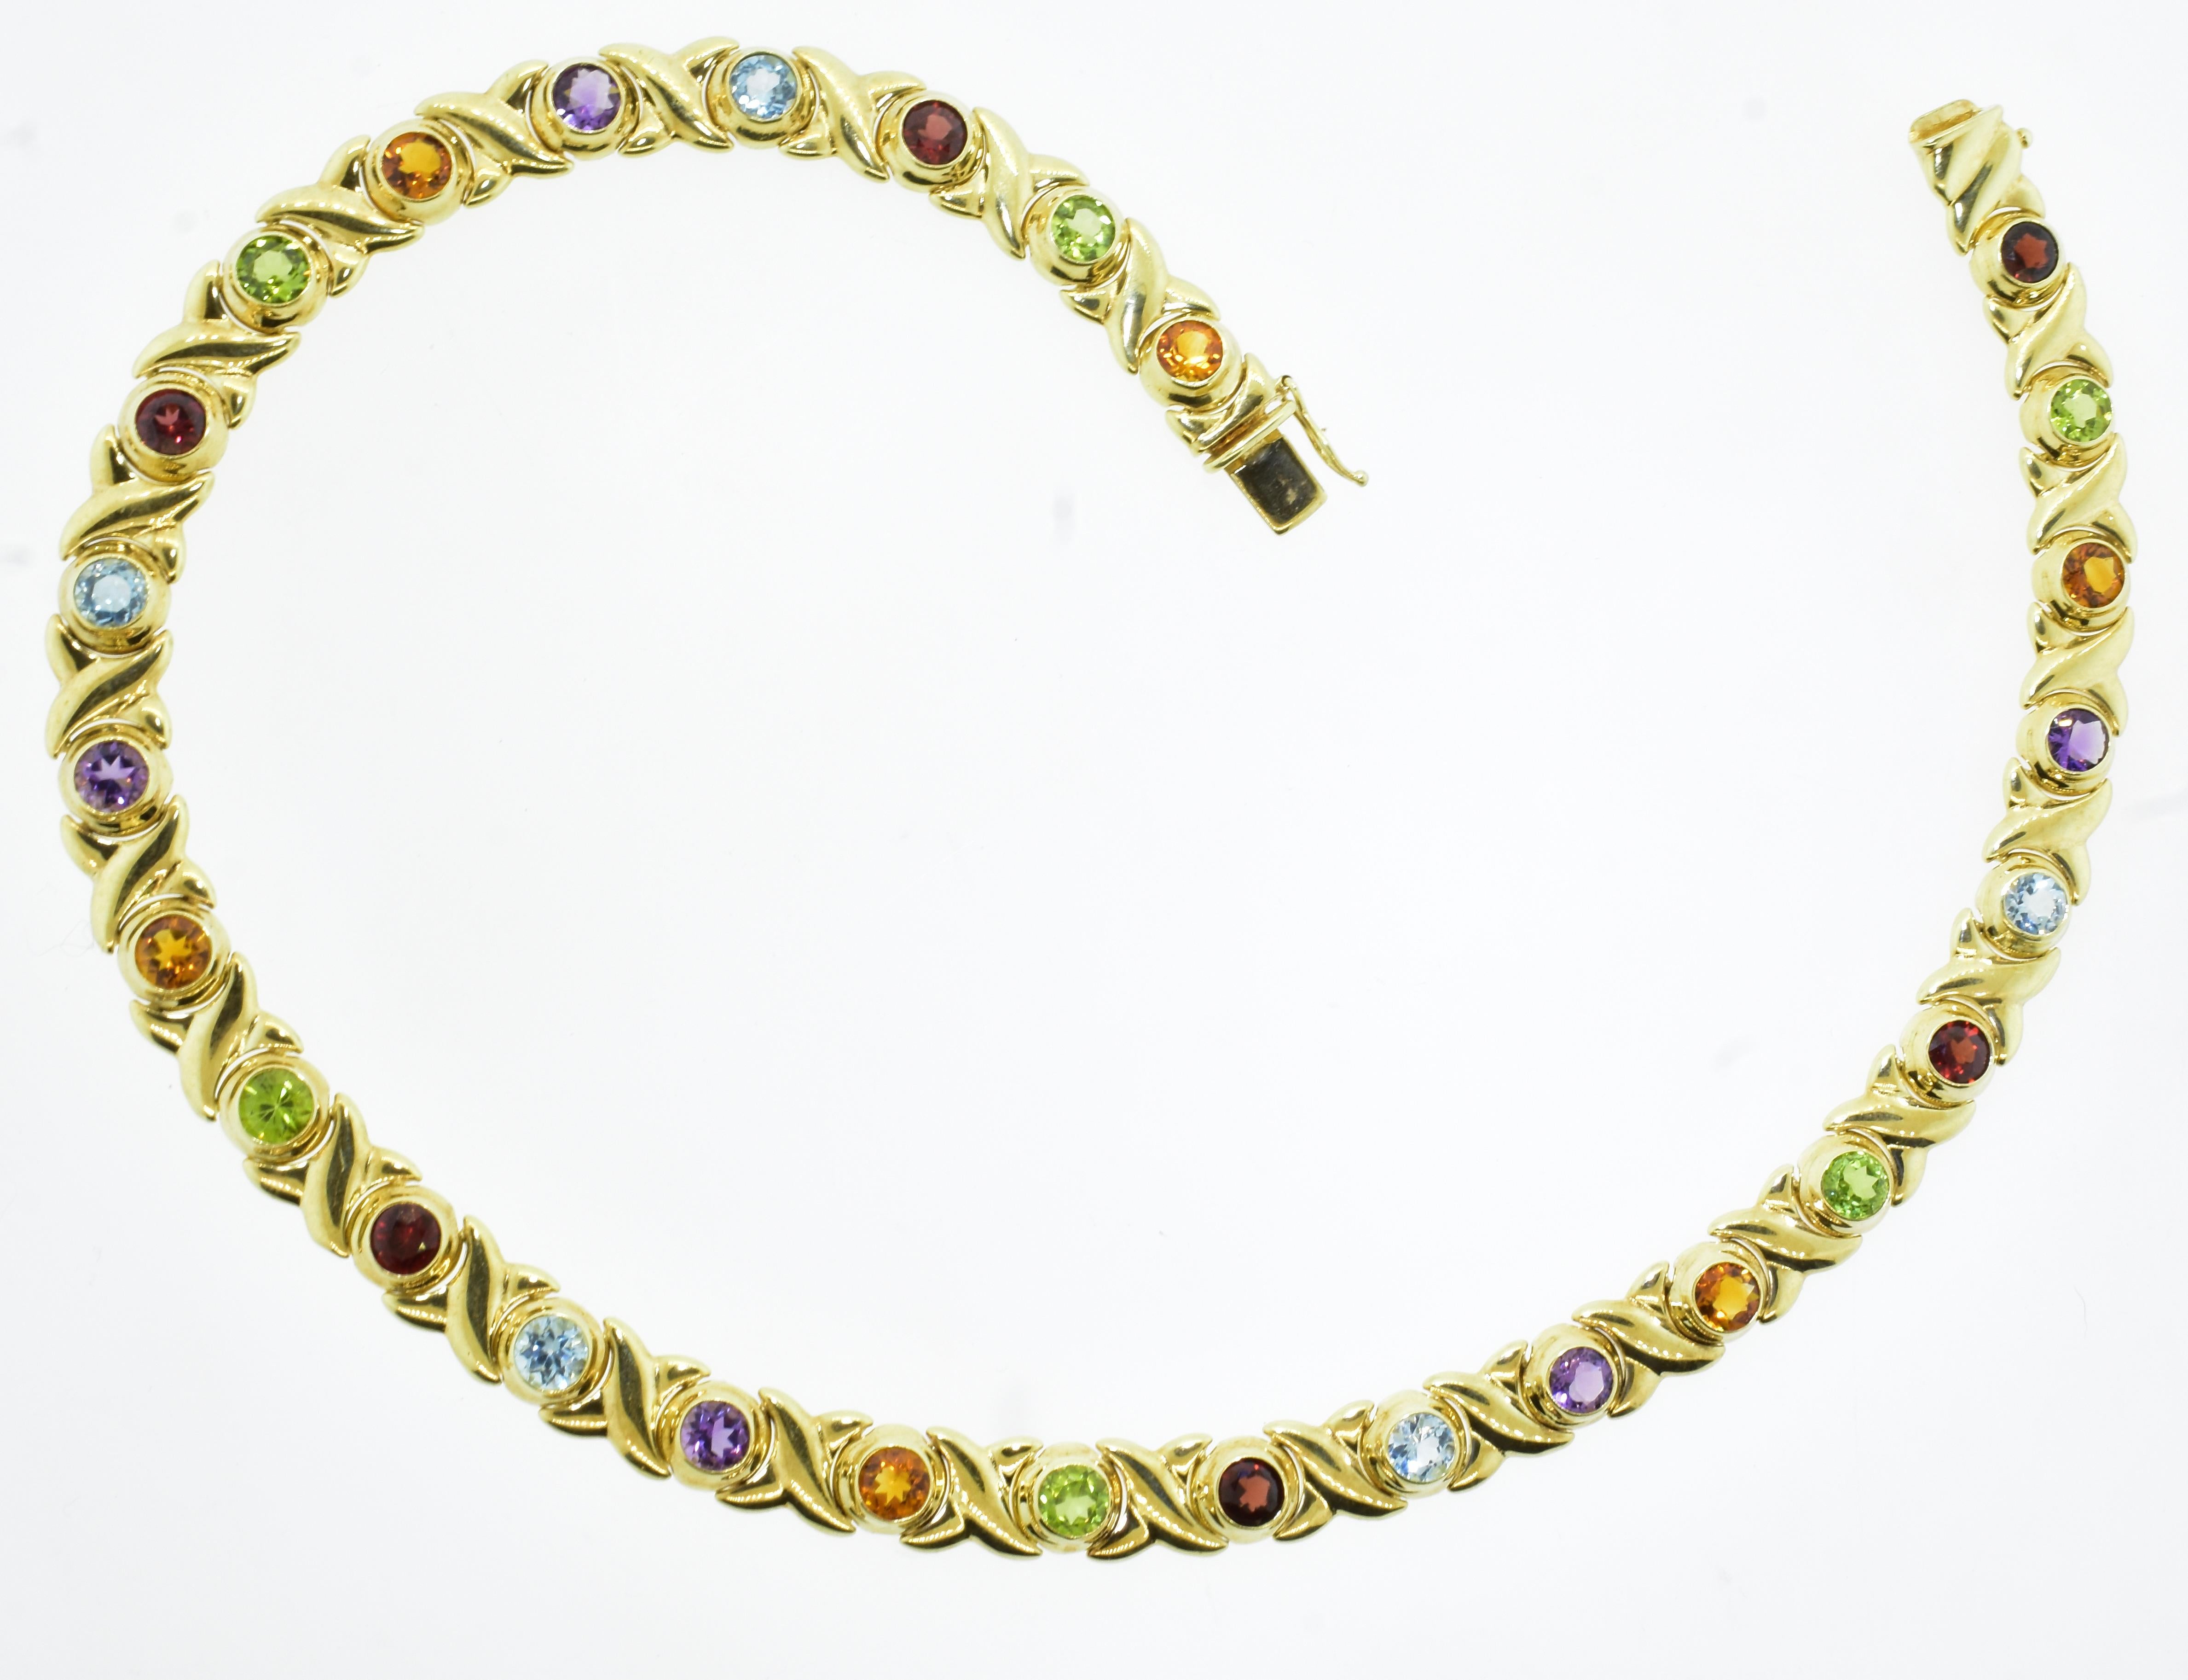 Contemporary Gem Set Yellow Gold Vintage Necklace with Peridot, Amethyst, Citrine, and Garnet For Sale